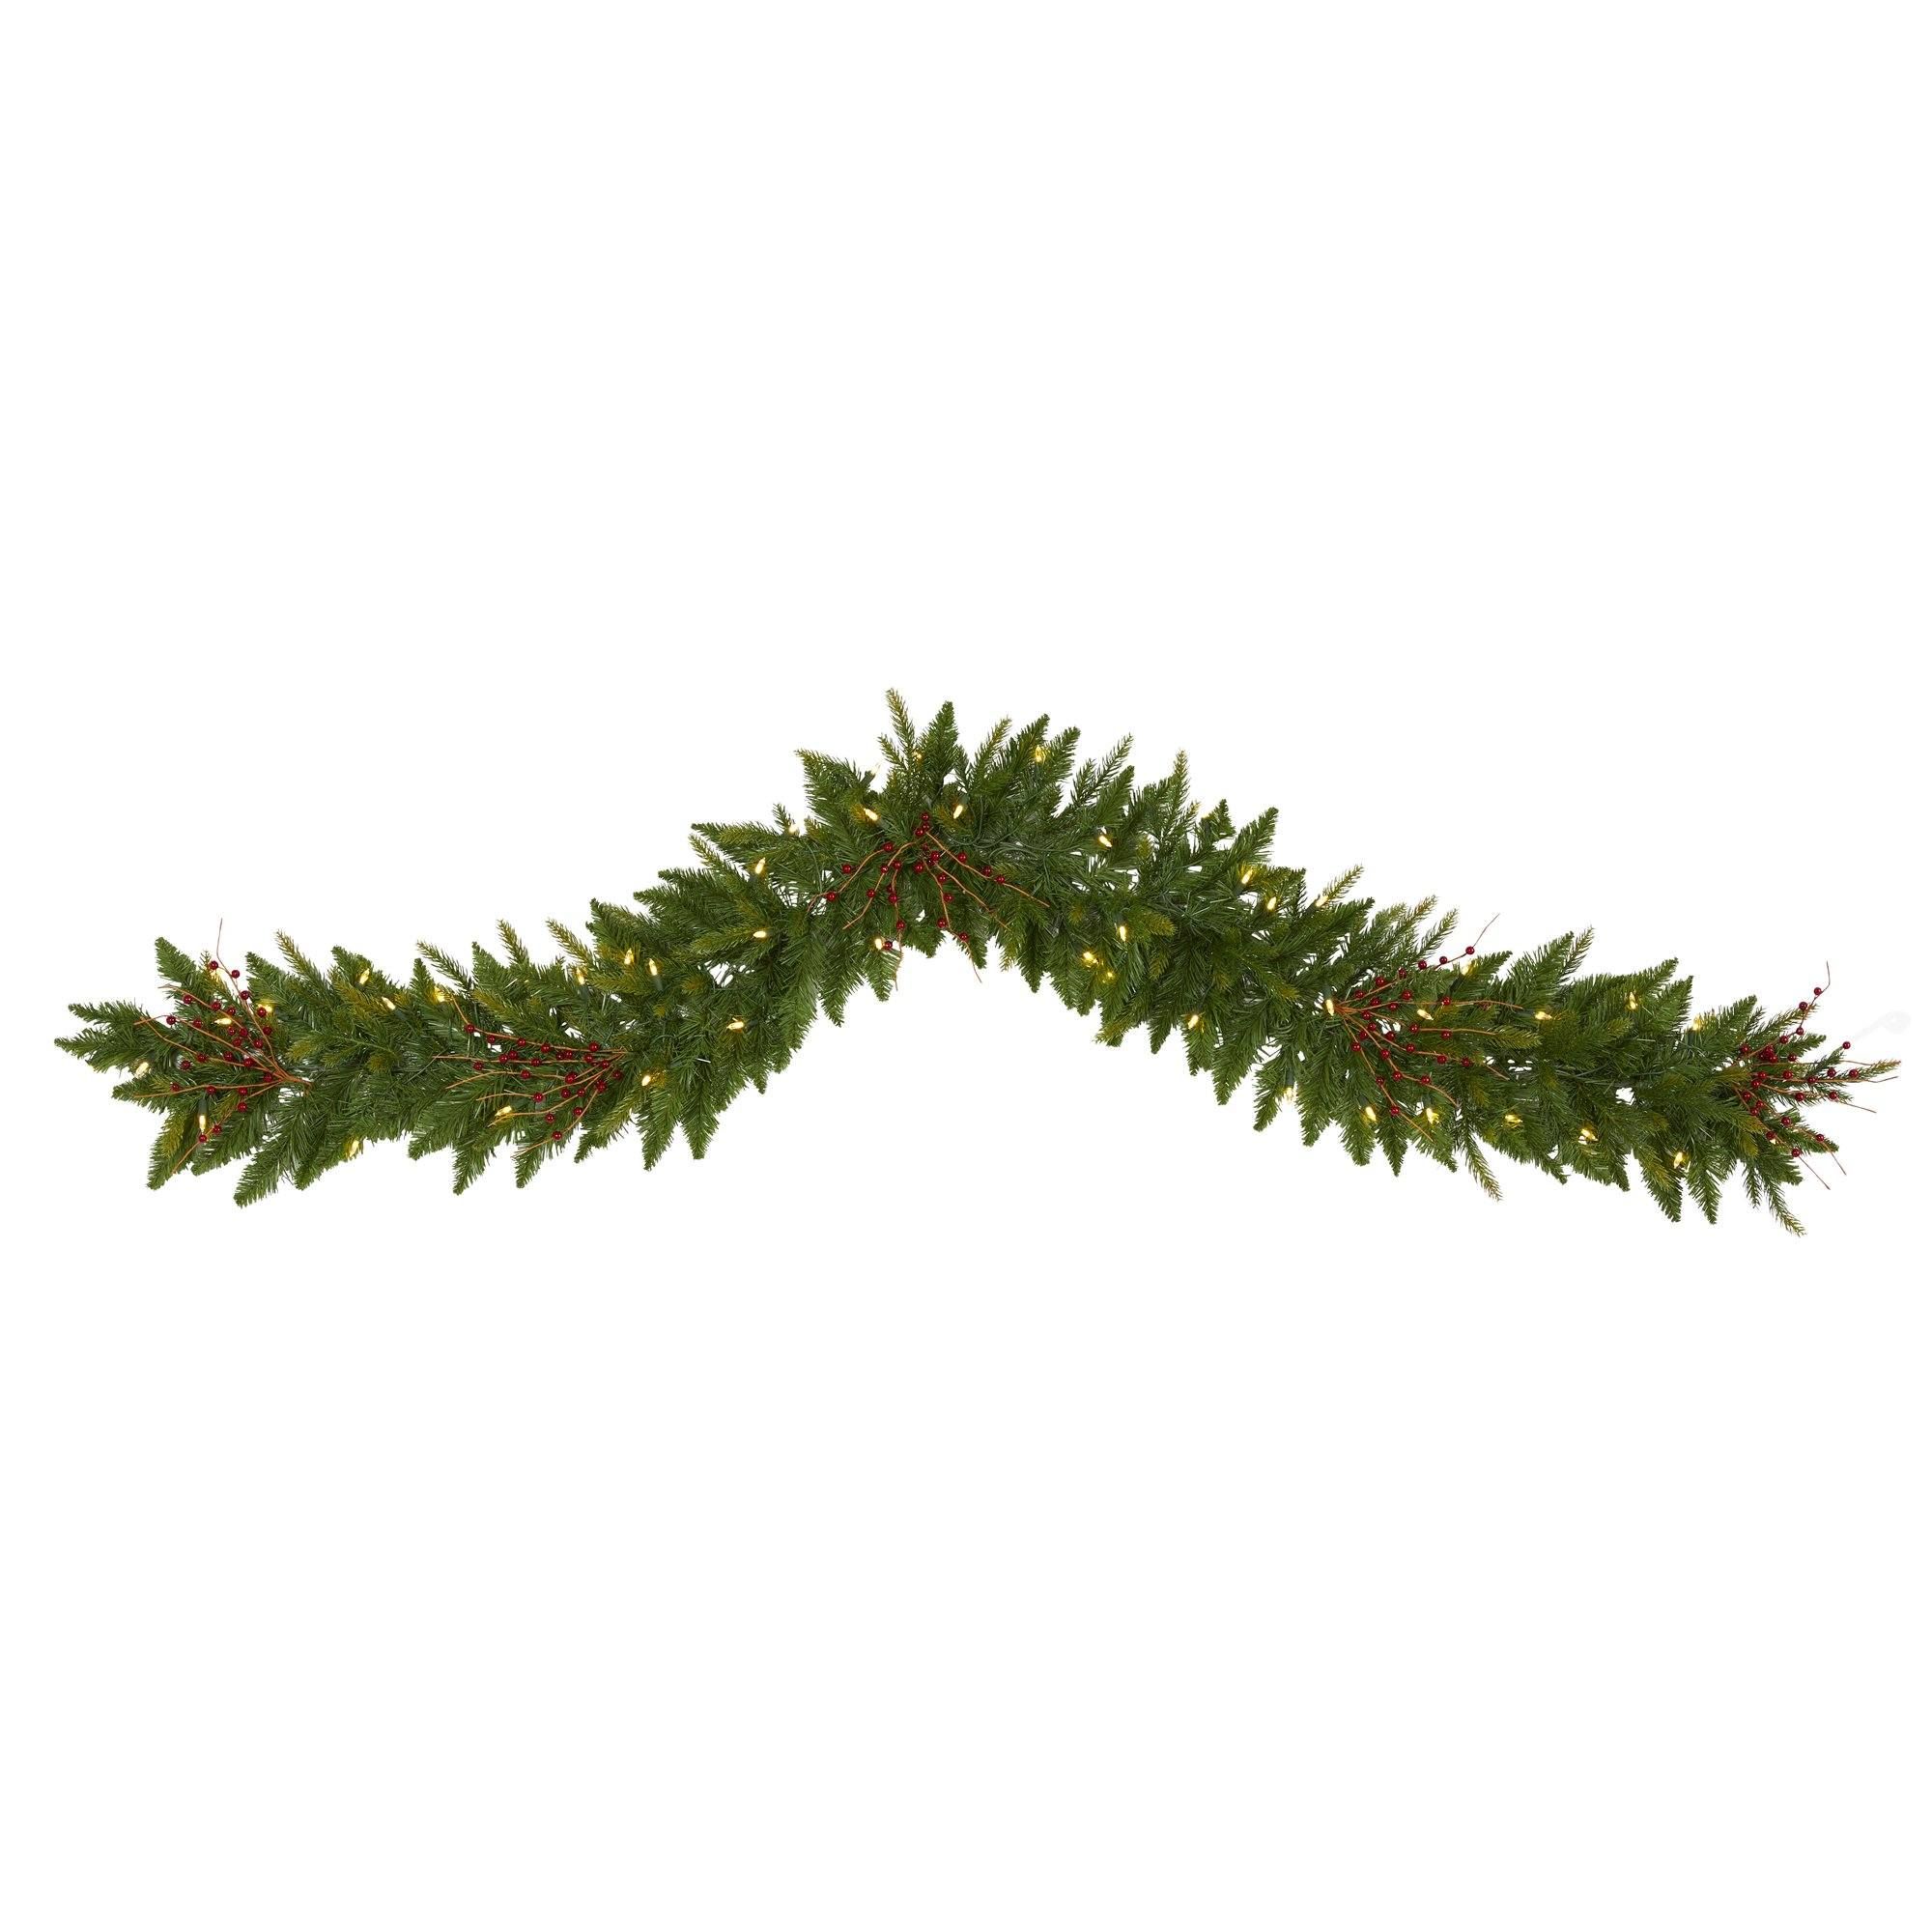 6' Christmas Pine Artificial Garland with 50 Warm White LED Lights and Berries | Nearly Natural